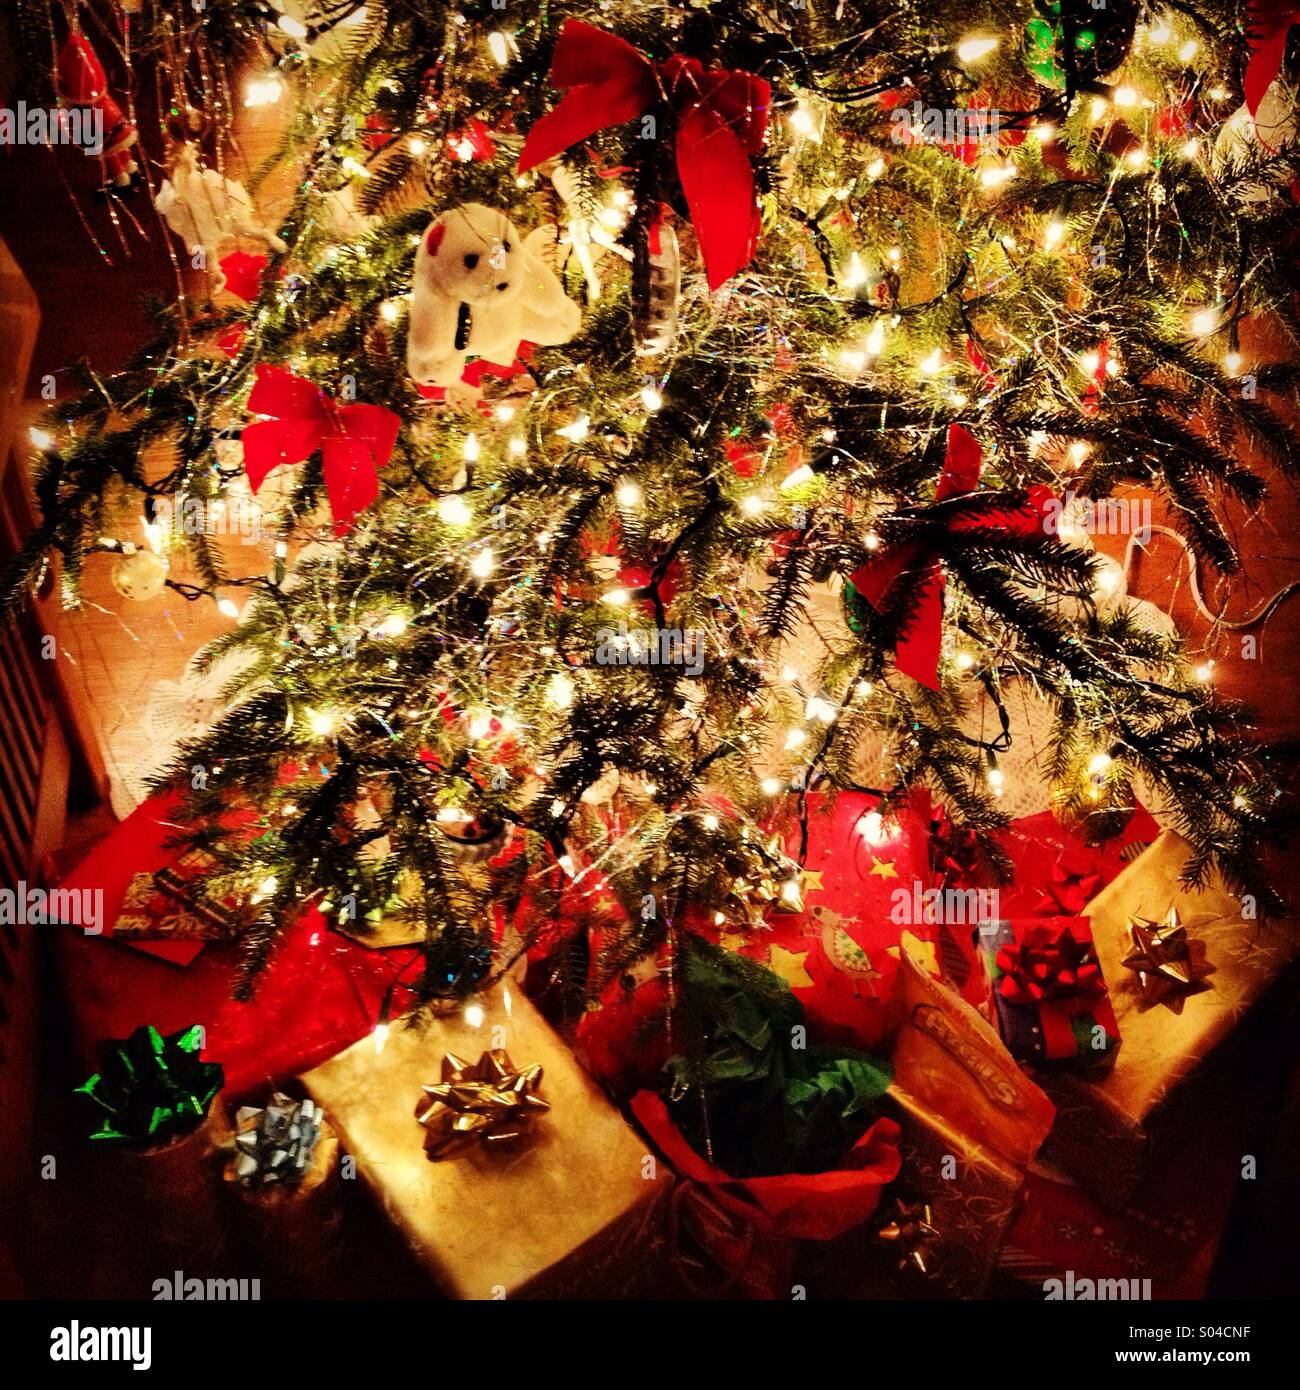 Christmas tree with gifts underneath. Stock Photo